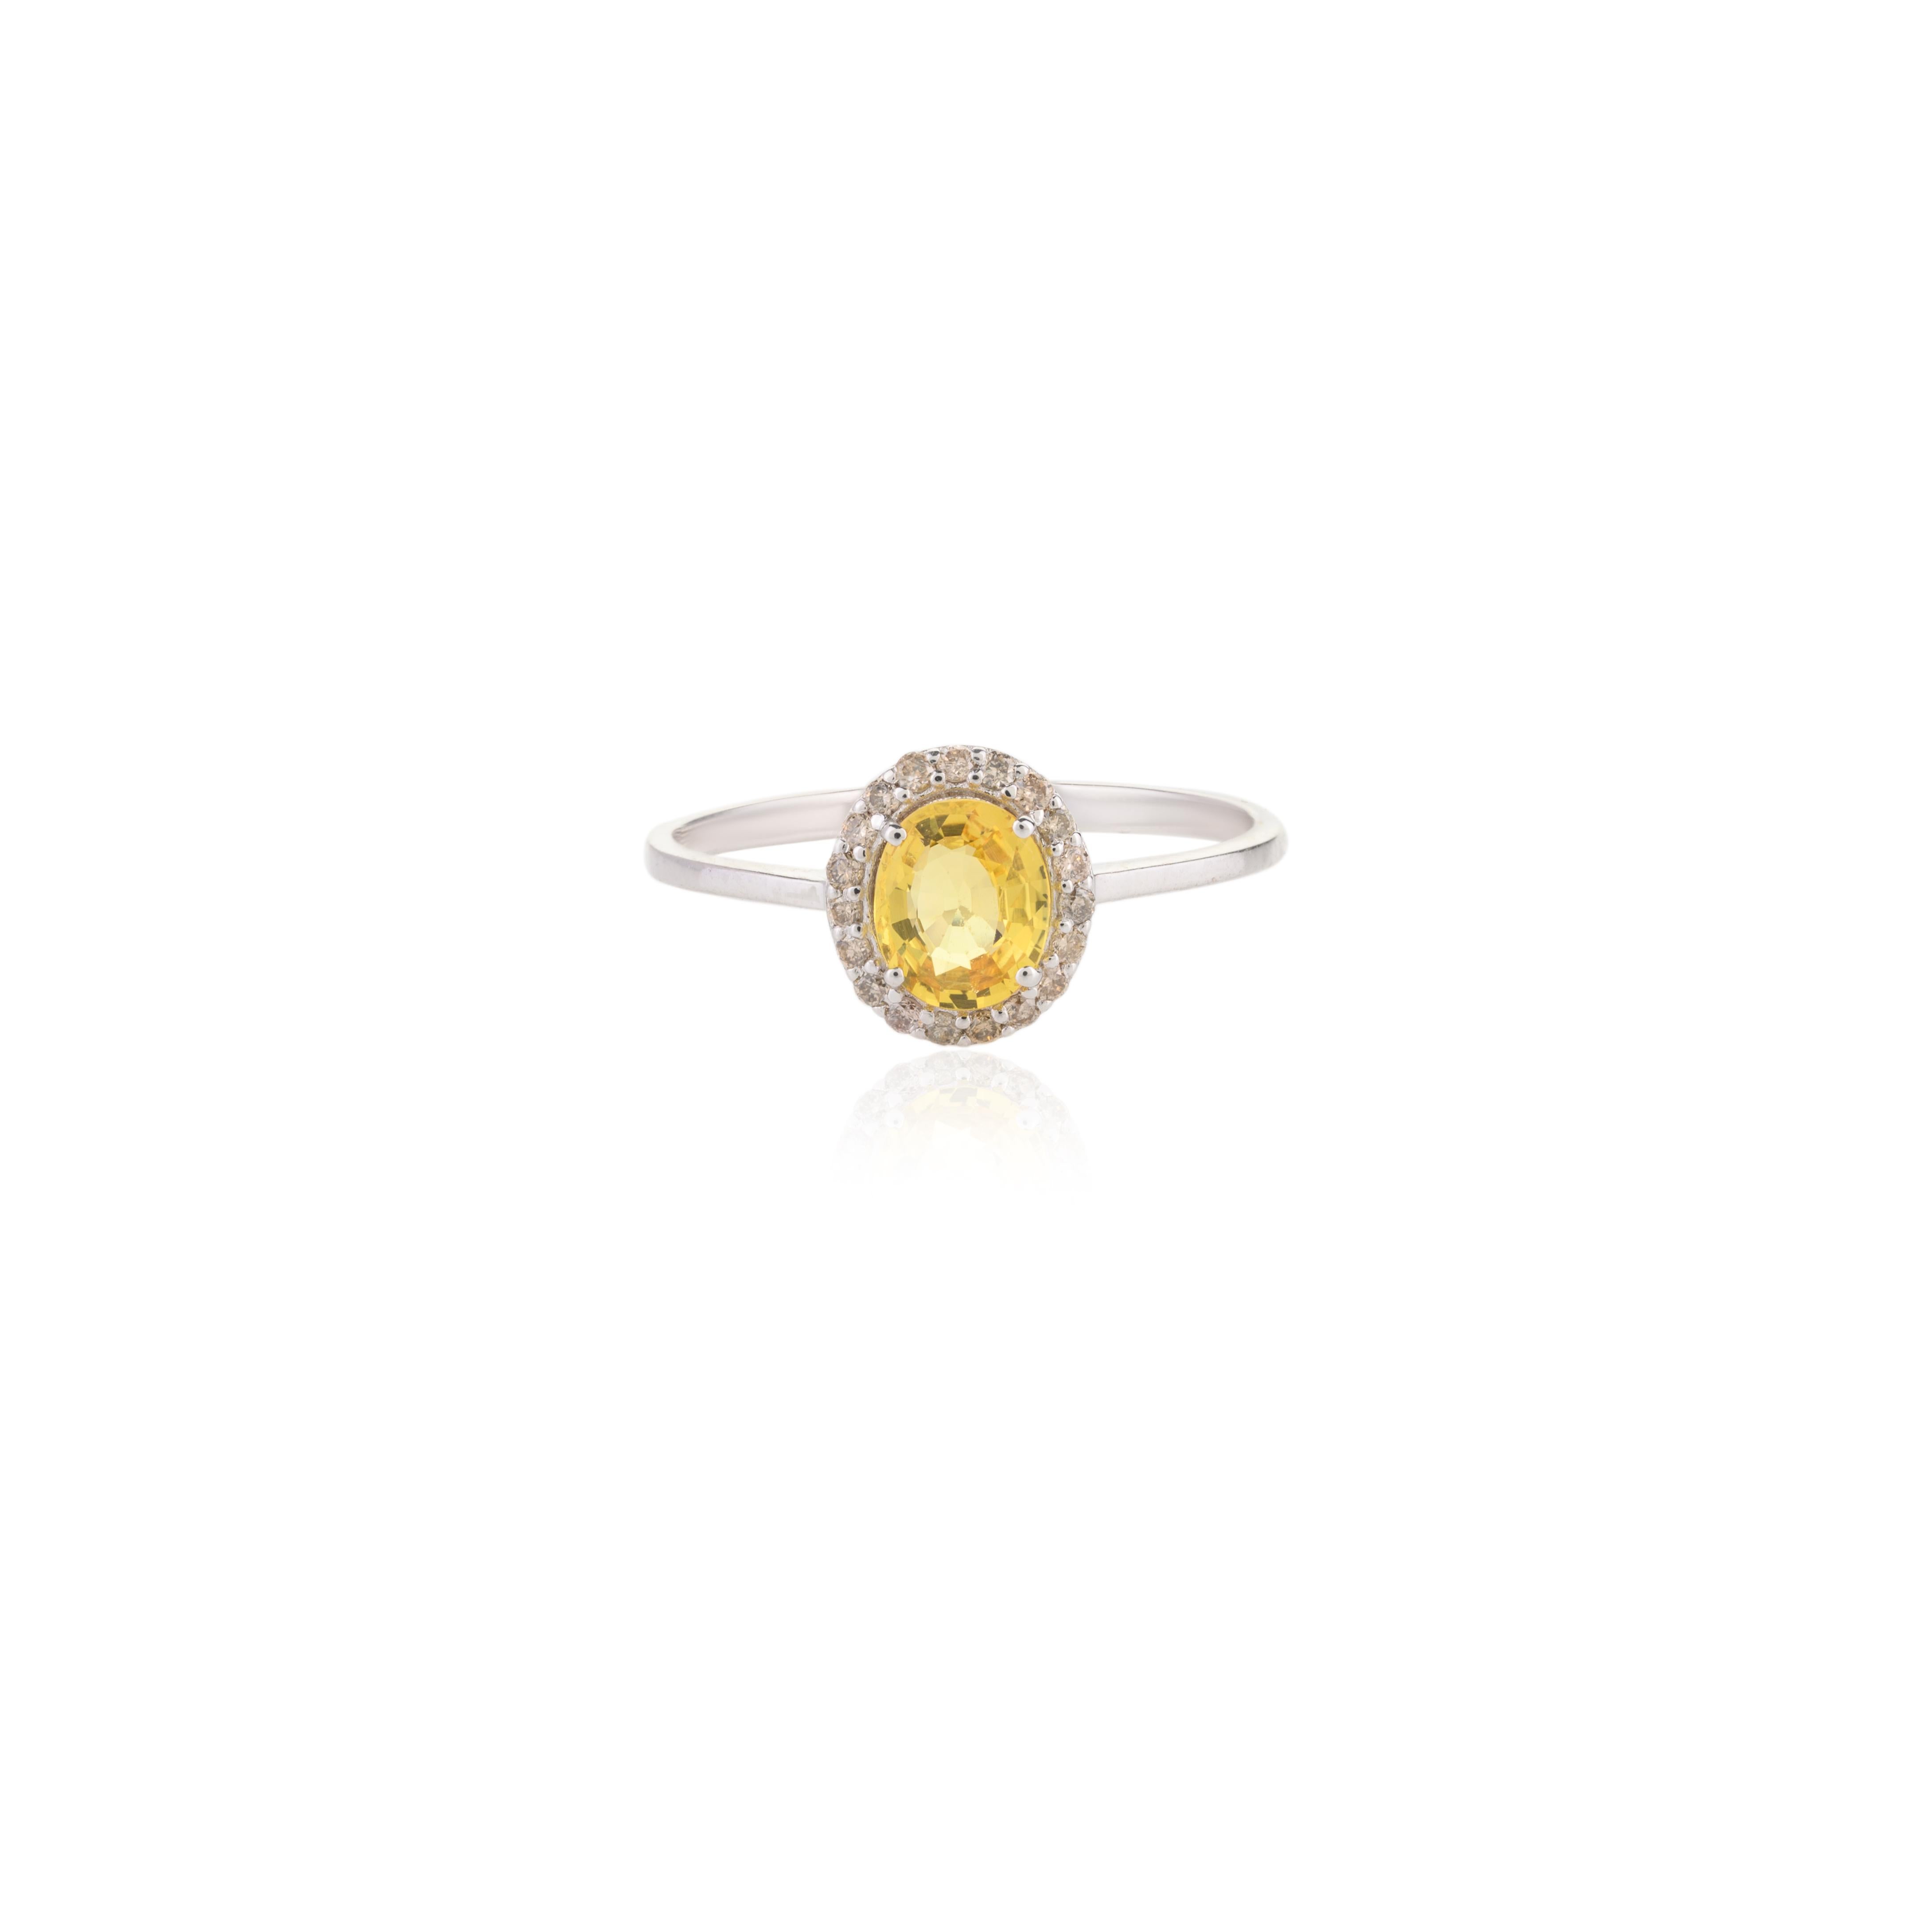 For Sale:  18k White Gold Yellow Sapphire Halo Diamond Ring and Pendant Jewelry Set for Her 3